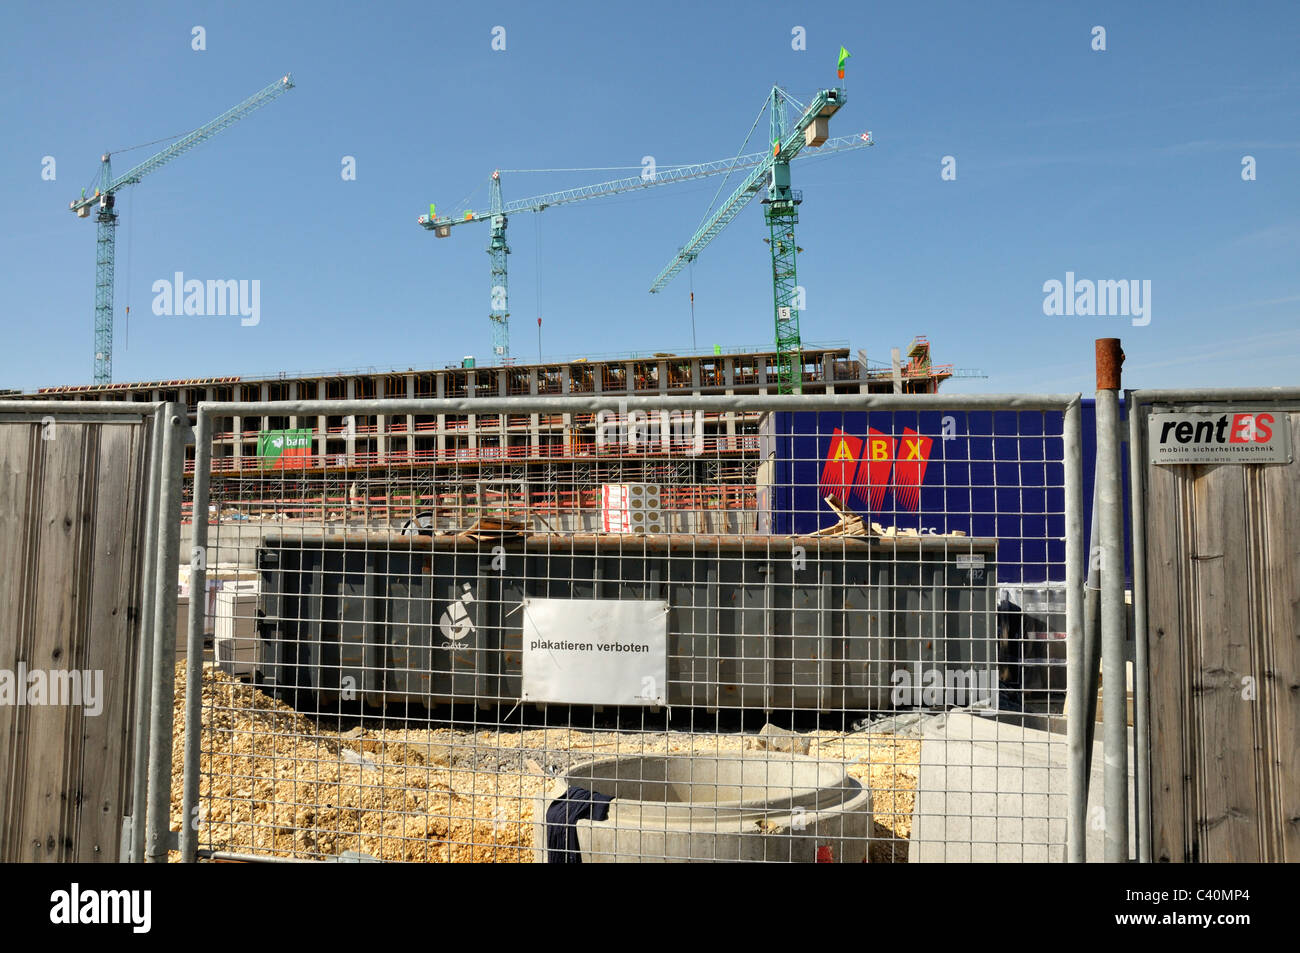 Construction branch, building site, building sites, Germany, Europe, clinic, Ulm, university medical center Stock Photo